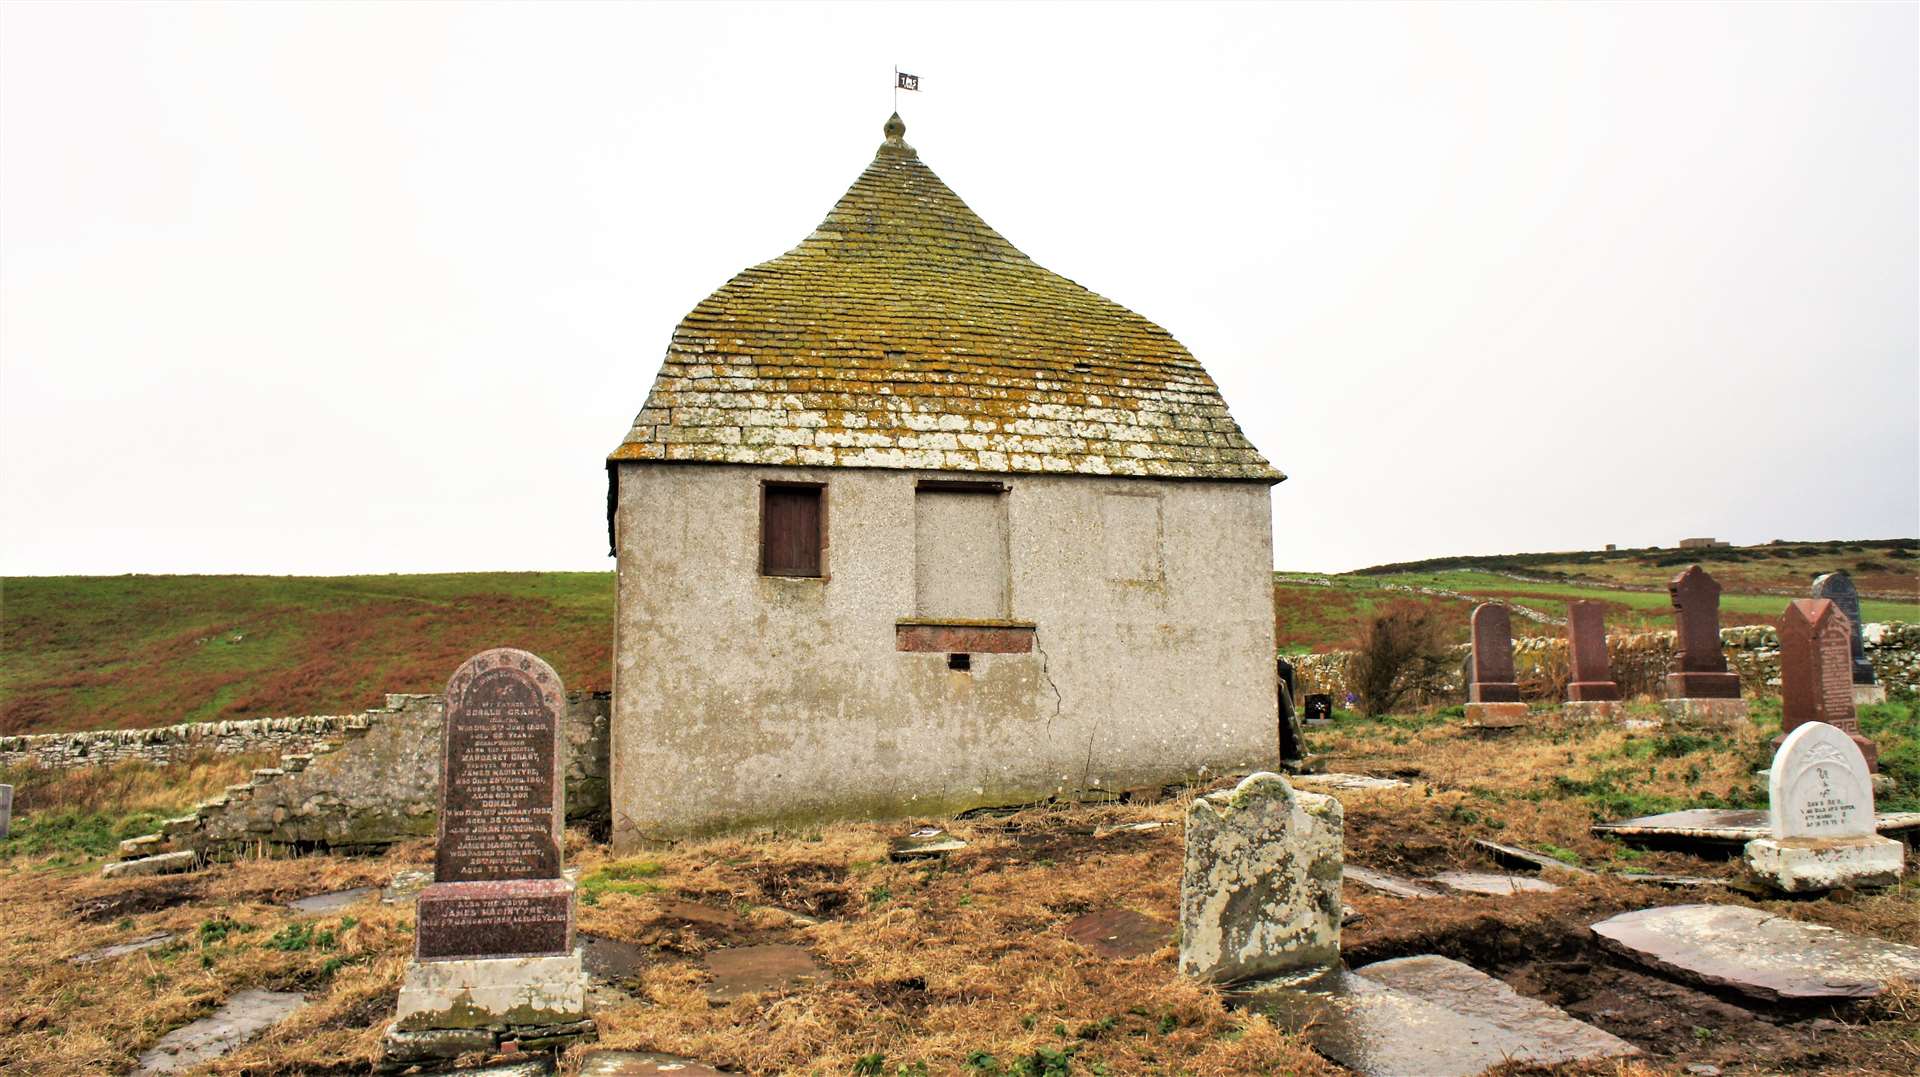 The Sinclair Mausoleum lies within the Mains of Ulbster graveyard and is historically connected to the present Lord Thurso. A previous Pictish find known as the Ulbster Stone, a cross slab with symbols, originally stood in a corner of the churchyard. It is now in Thurso's North Coast Visitor Centre museum. Picture: DGS